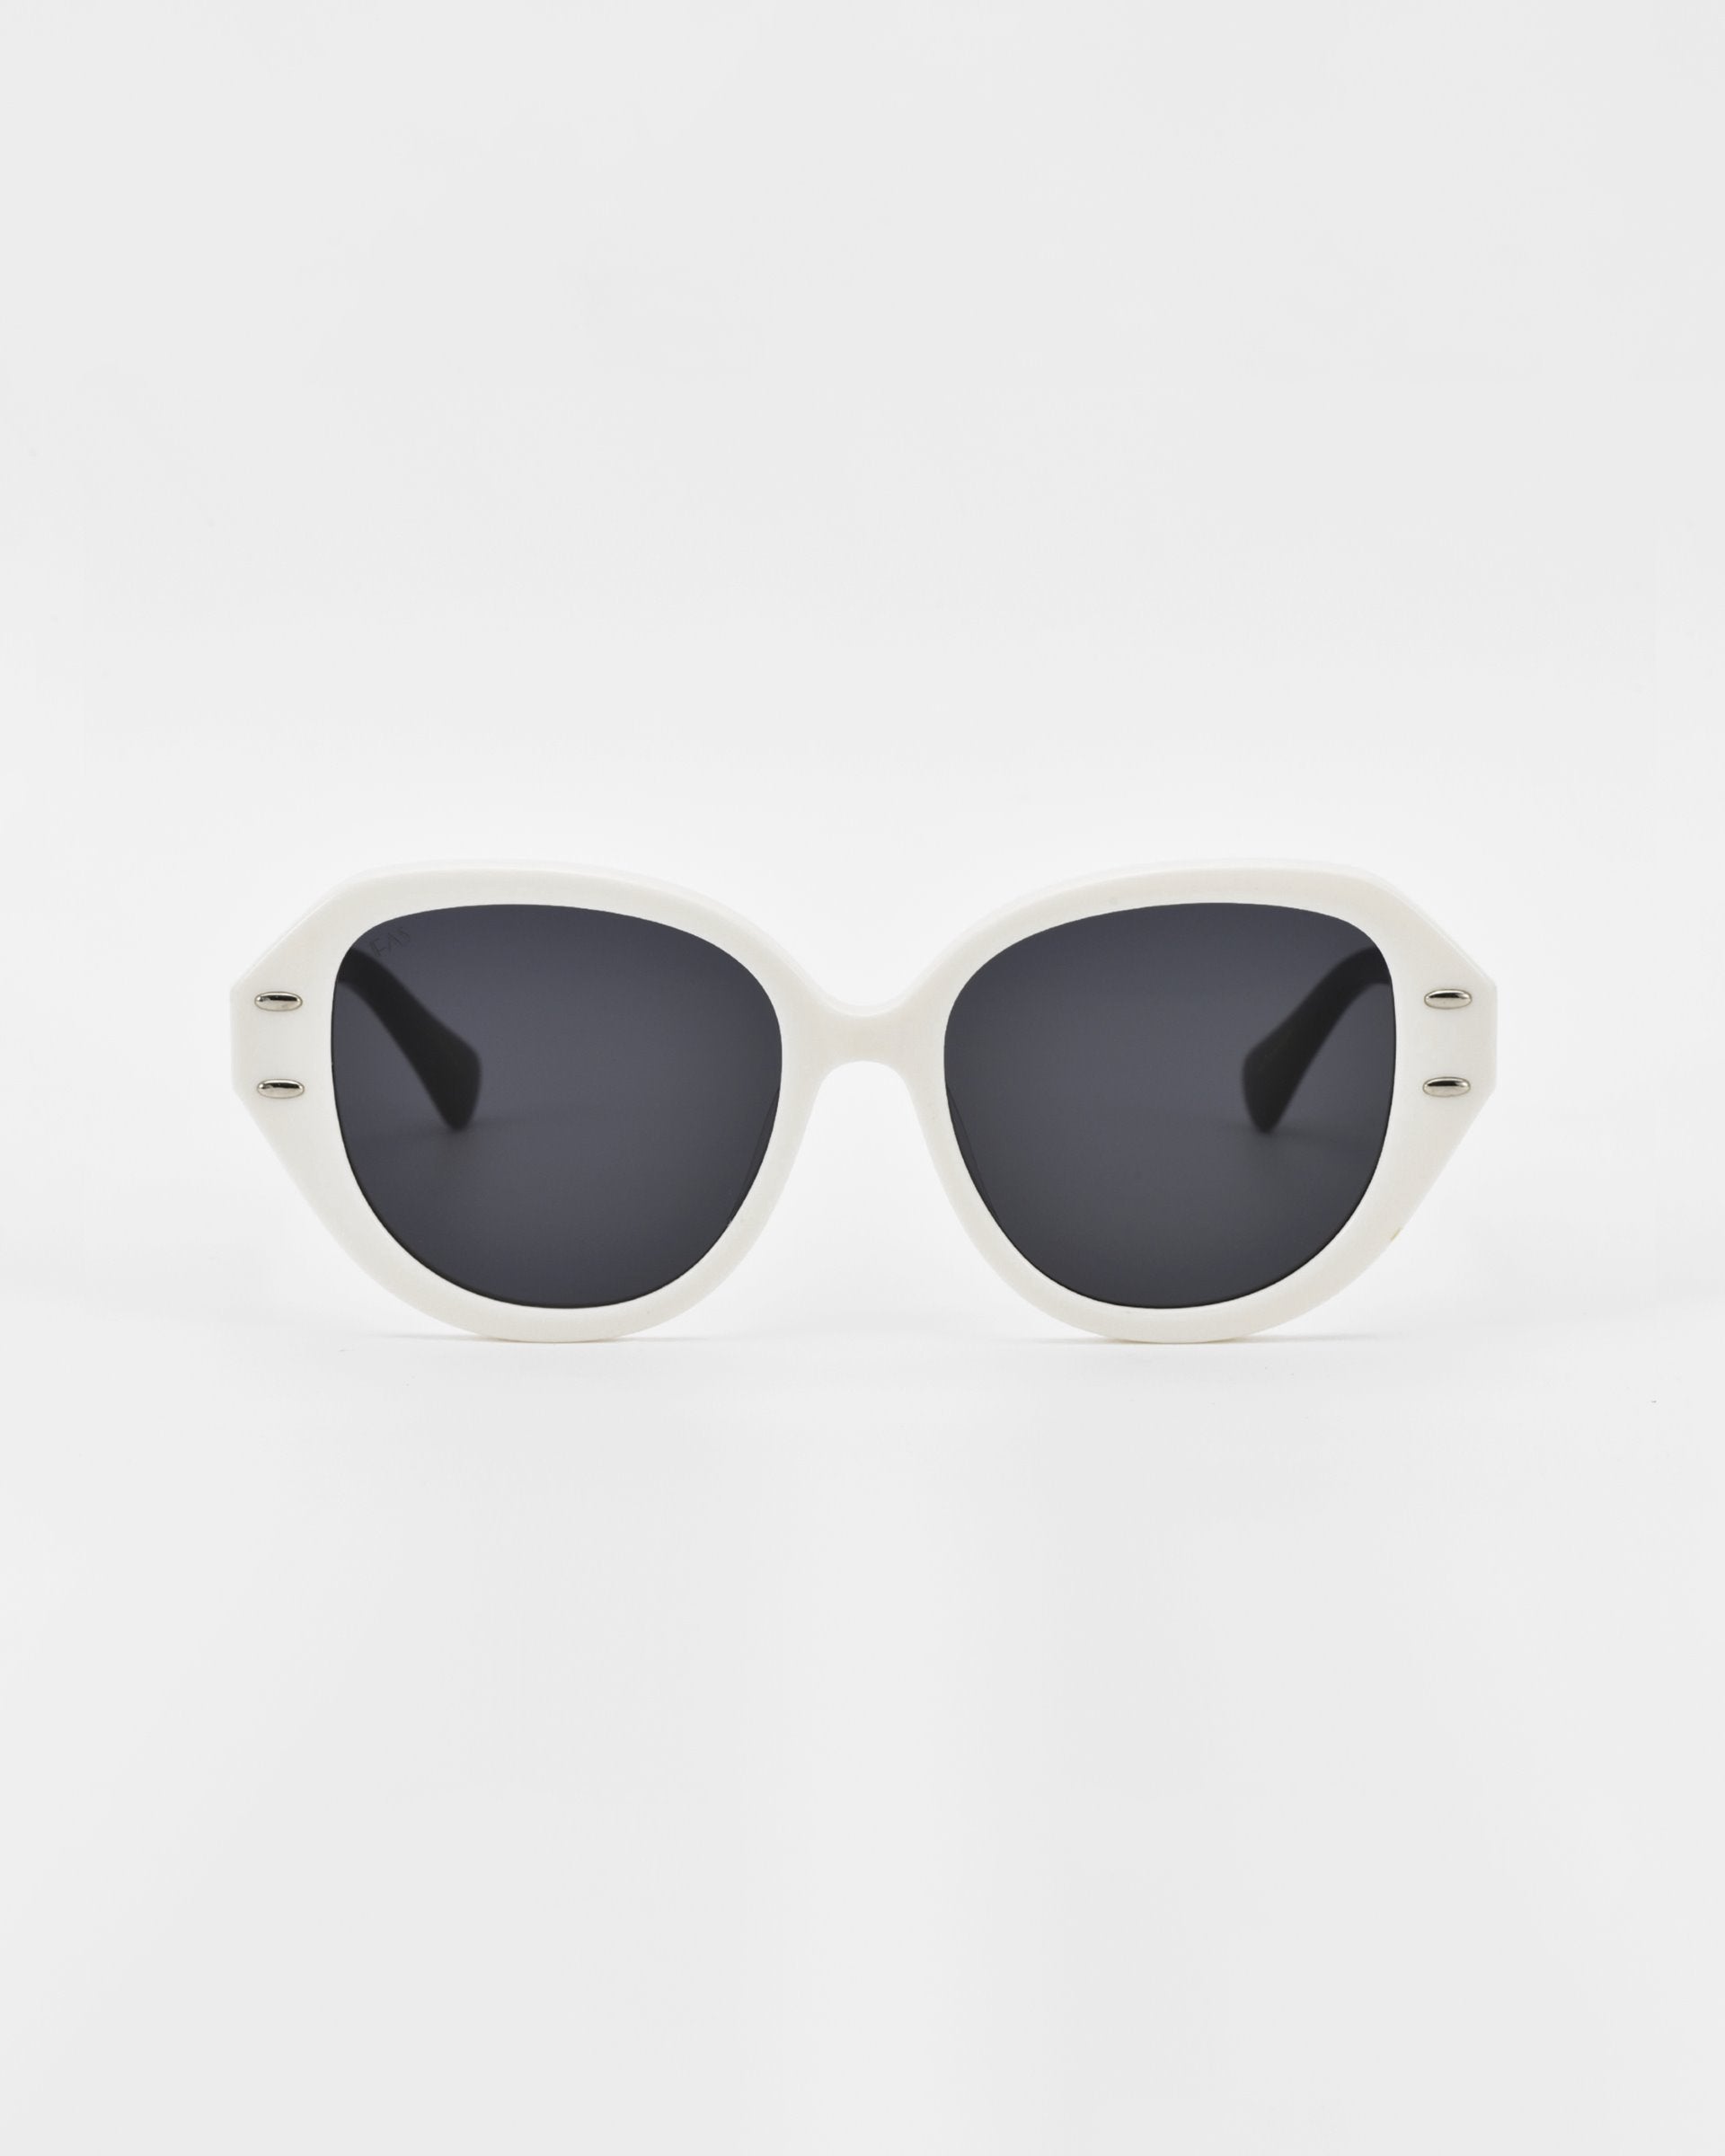 A pair of white-framed Mirage sunglasses by For Art&#39;s Sake® with black lenses, set against a plain white background. The design features rounded edges and a slightly retro style, crafted from plant-based acetate.